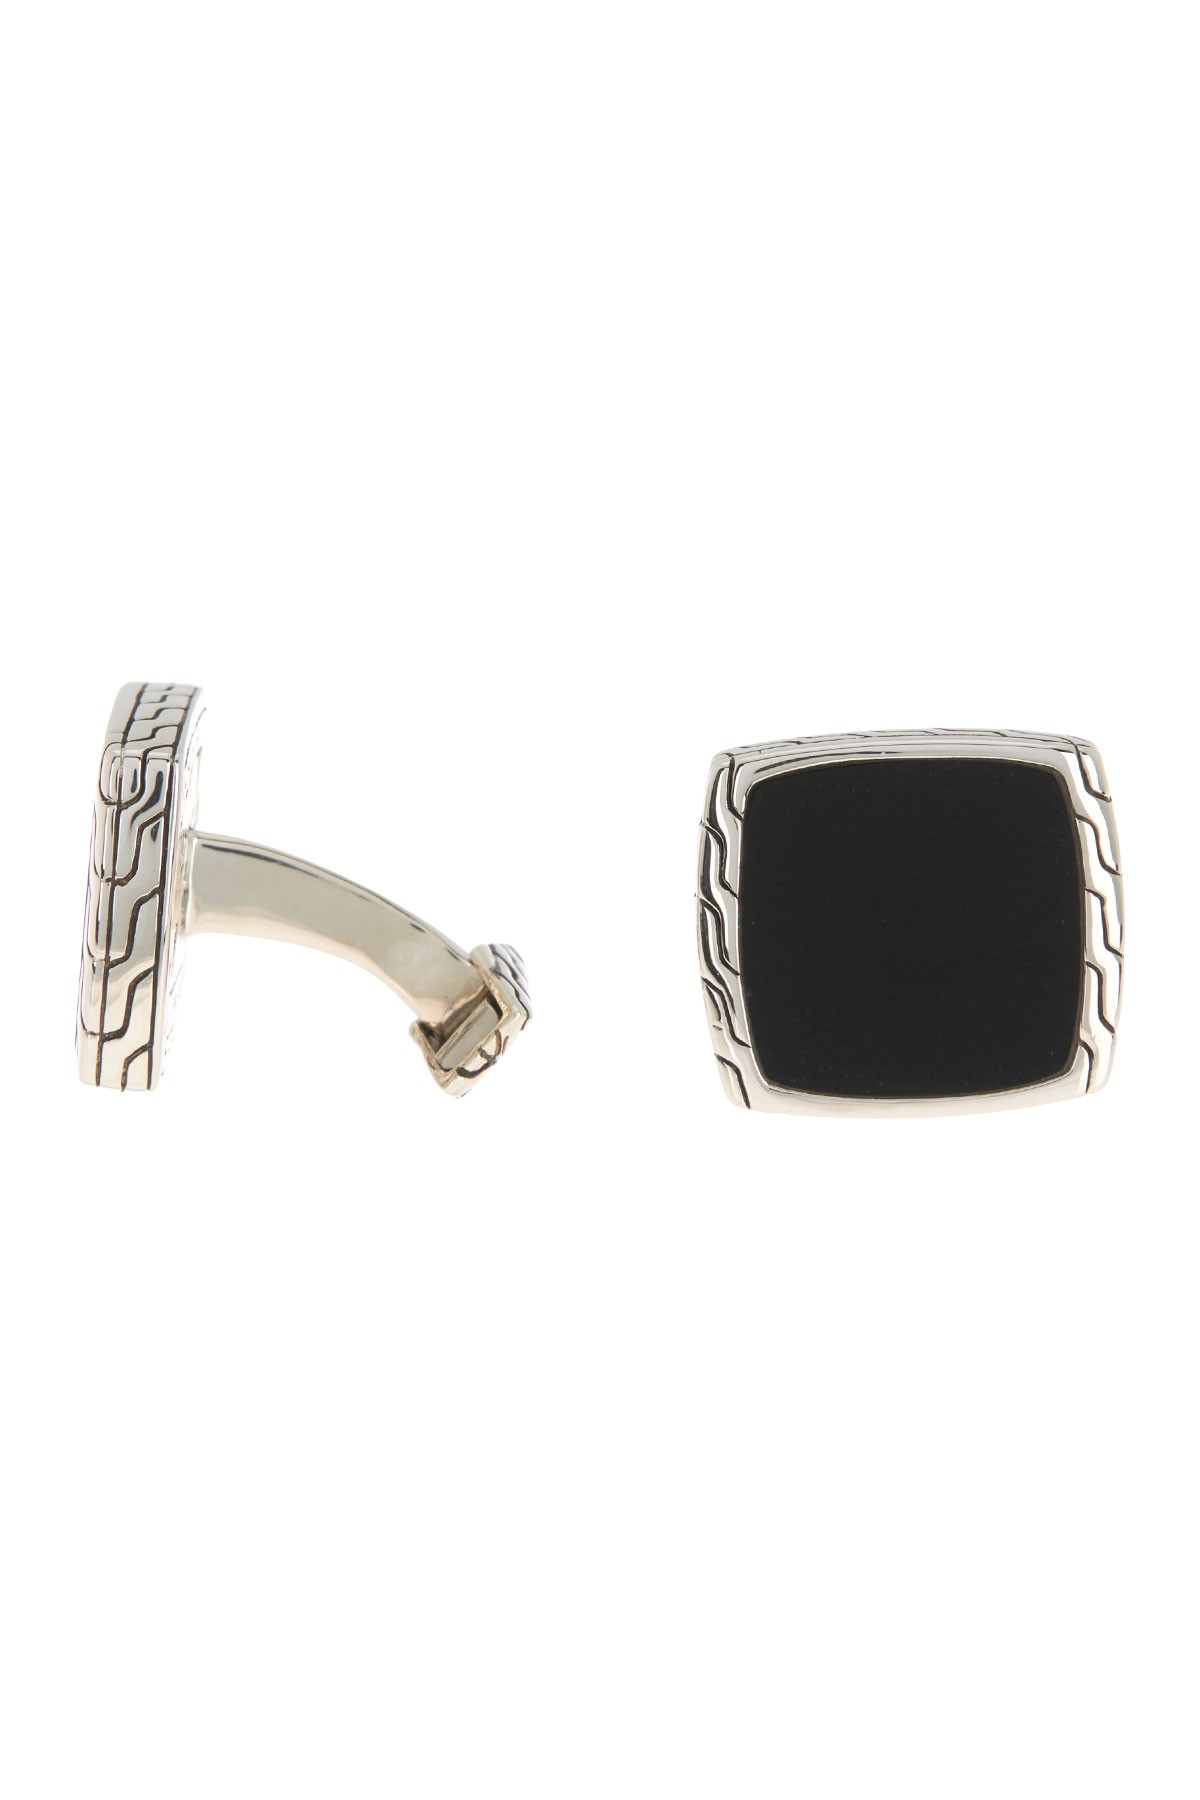 Chain Embossed Trimmed Cuff Links JOHN HARDY